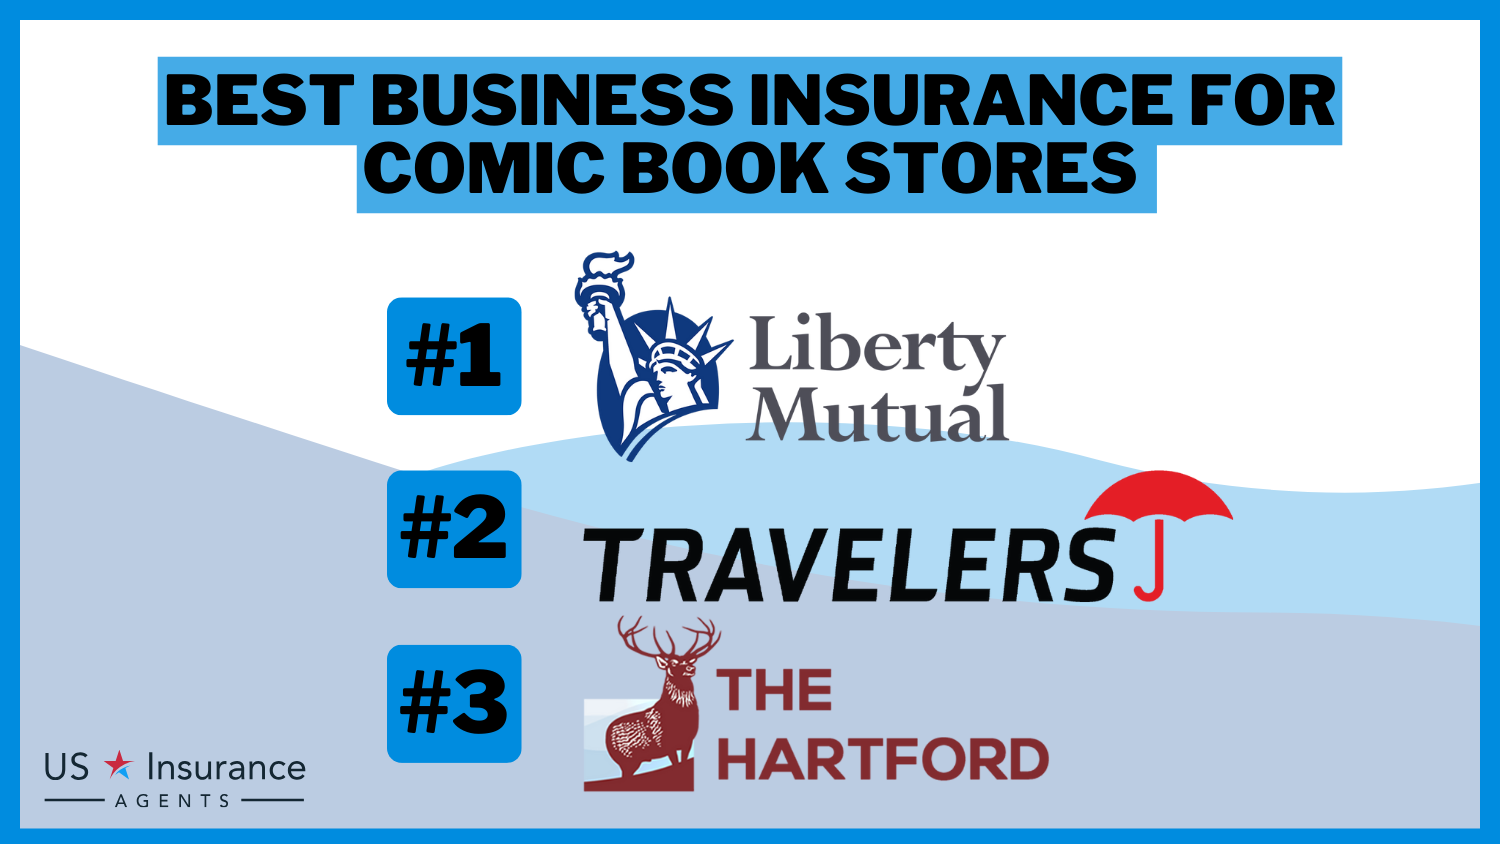 Best Business Insurance for Comic Book Stores: Liberty Mutual, Travelers, and The Hartford.